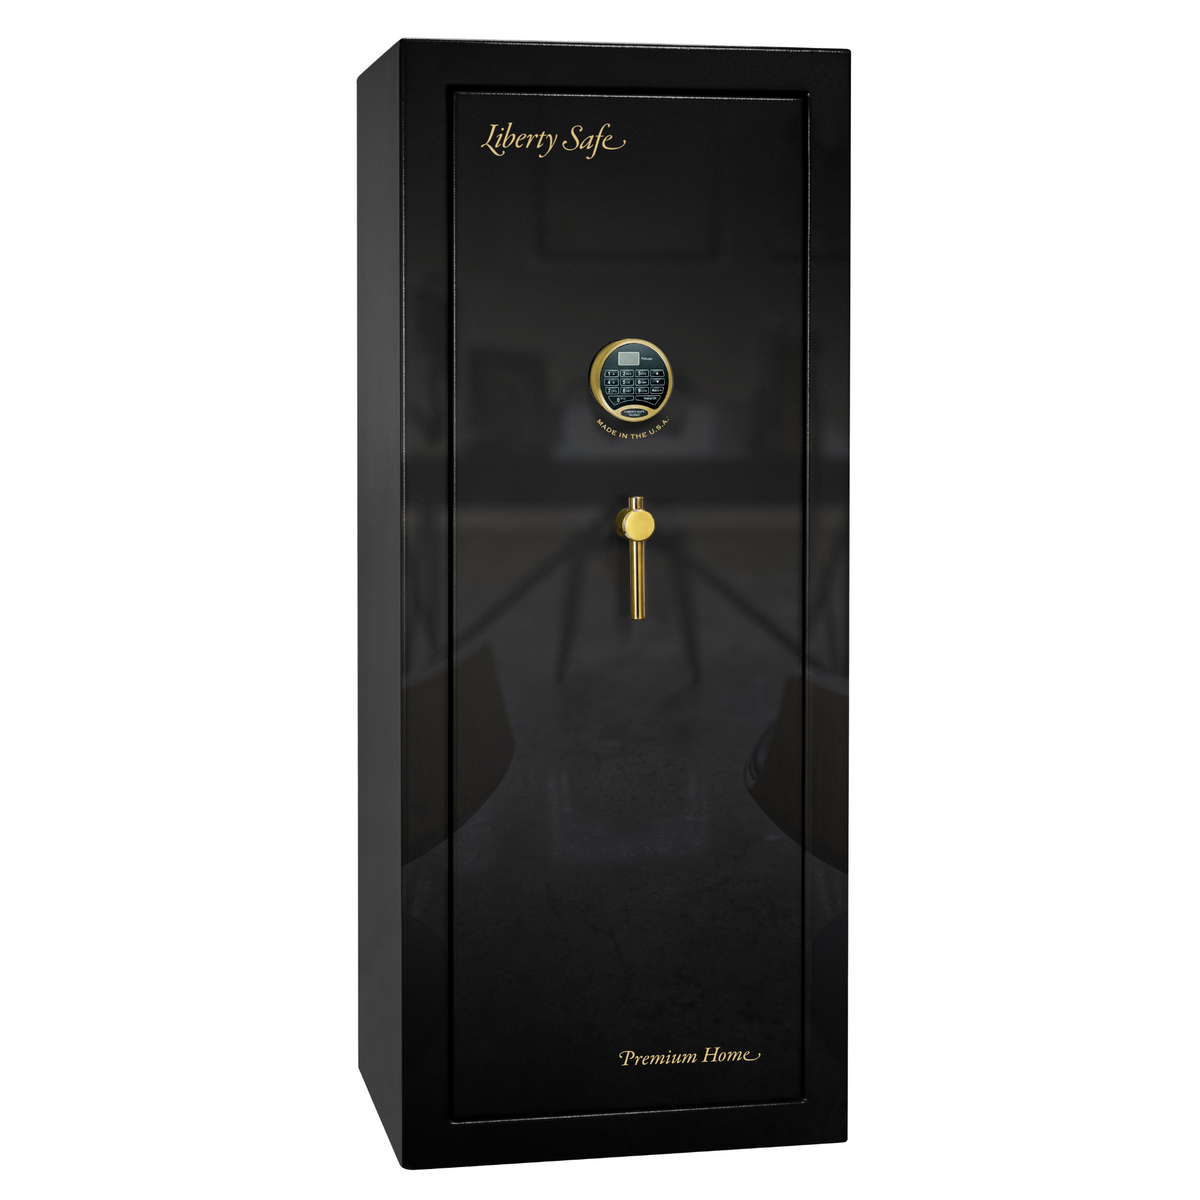 Premium Home Series | Level 7 Security | 2 Hour Fire Protection | 17 | Dimensions: 60.25&quot;(H) x 24.5&quot;(W) x 19&quot;(D) | Black Gloss Brass - Closed Door